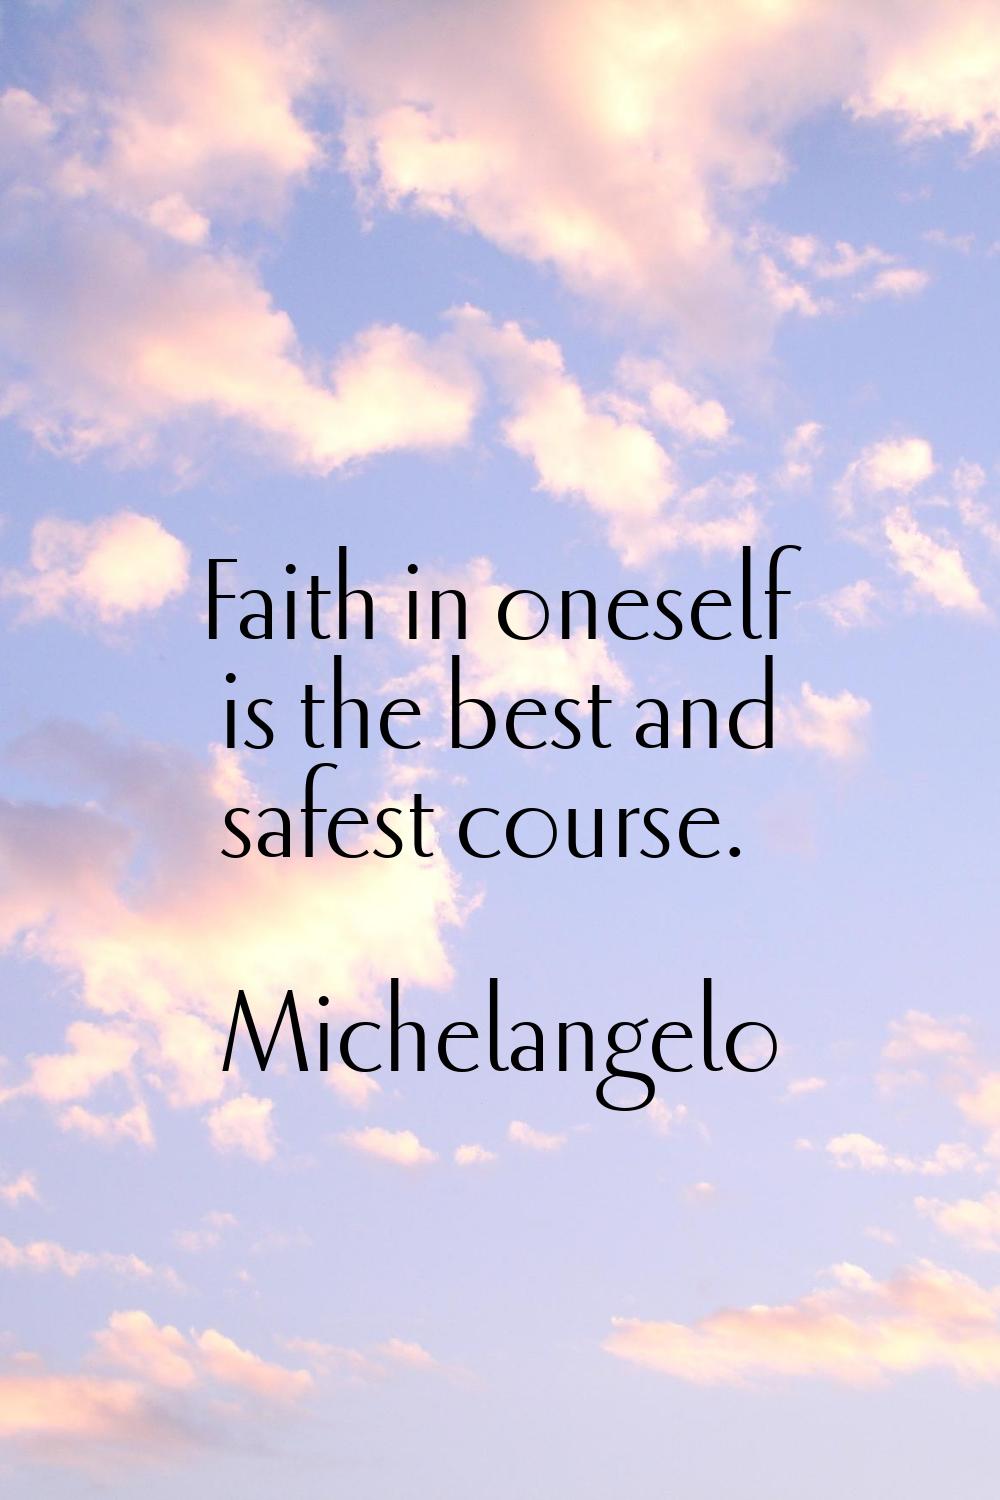 Faith in oneself is the best and safest course.